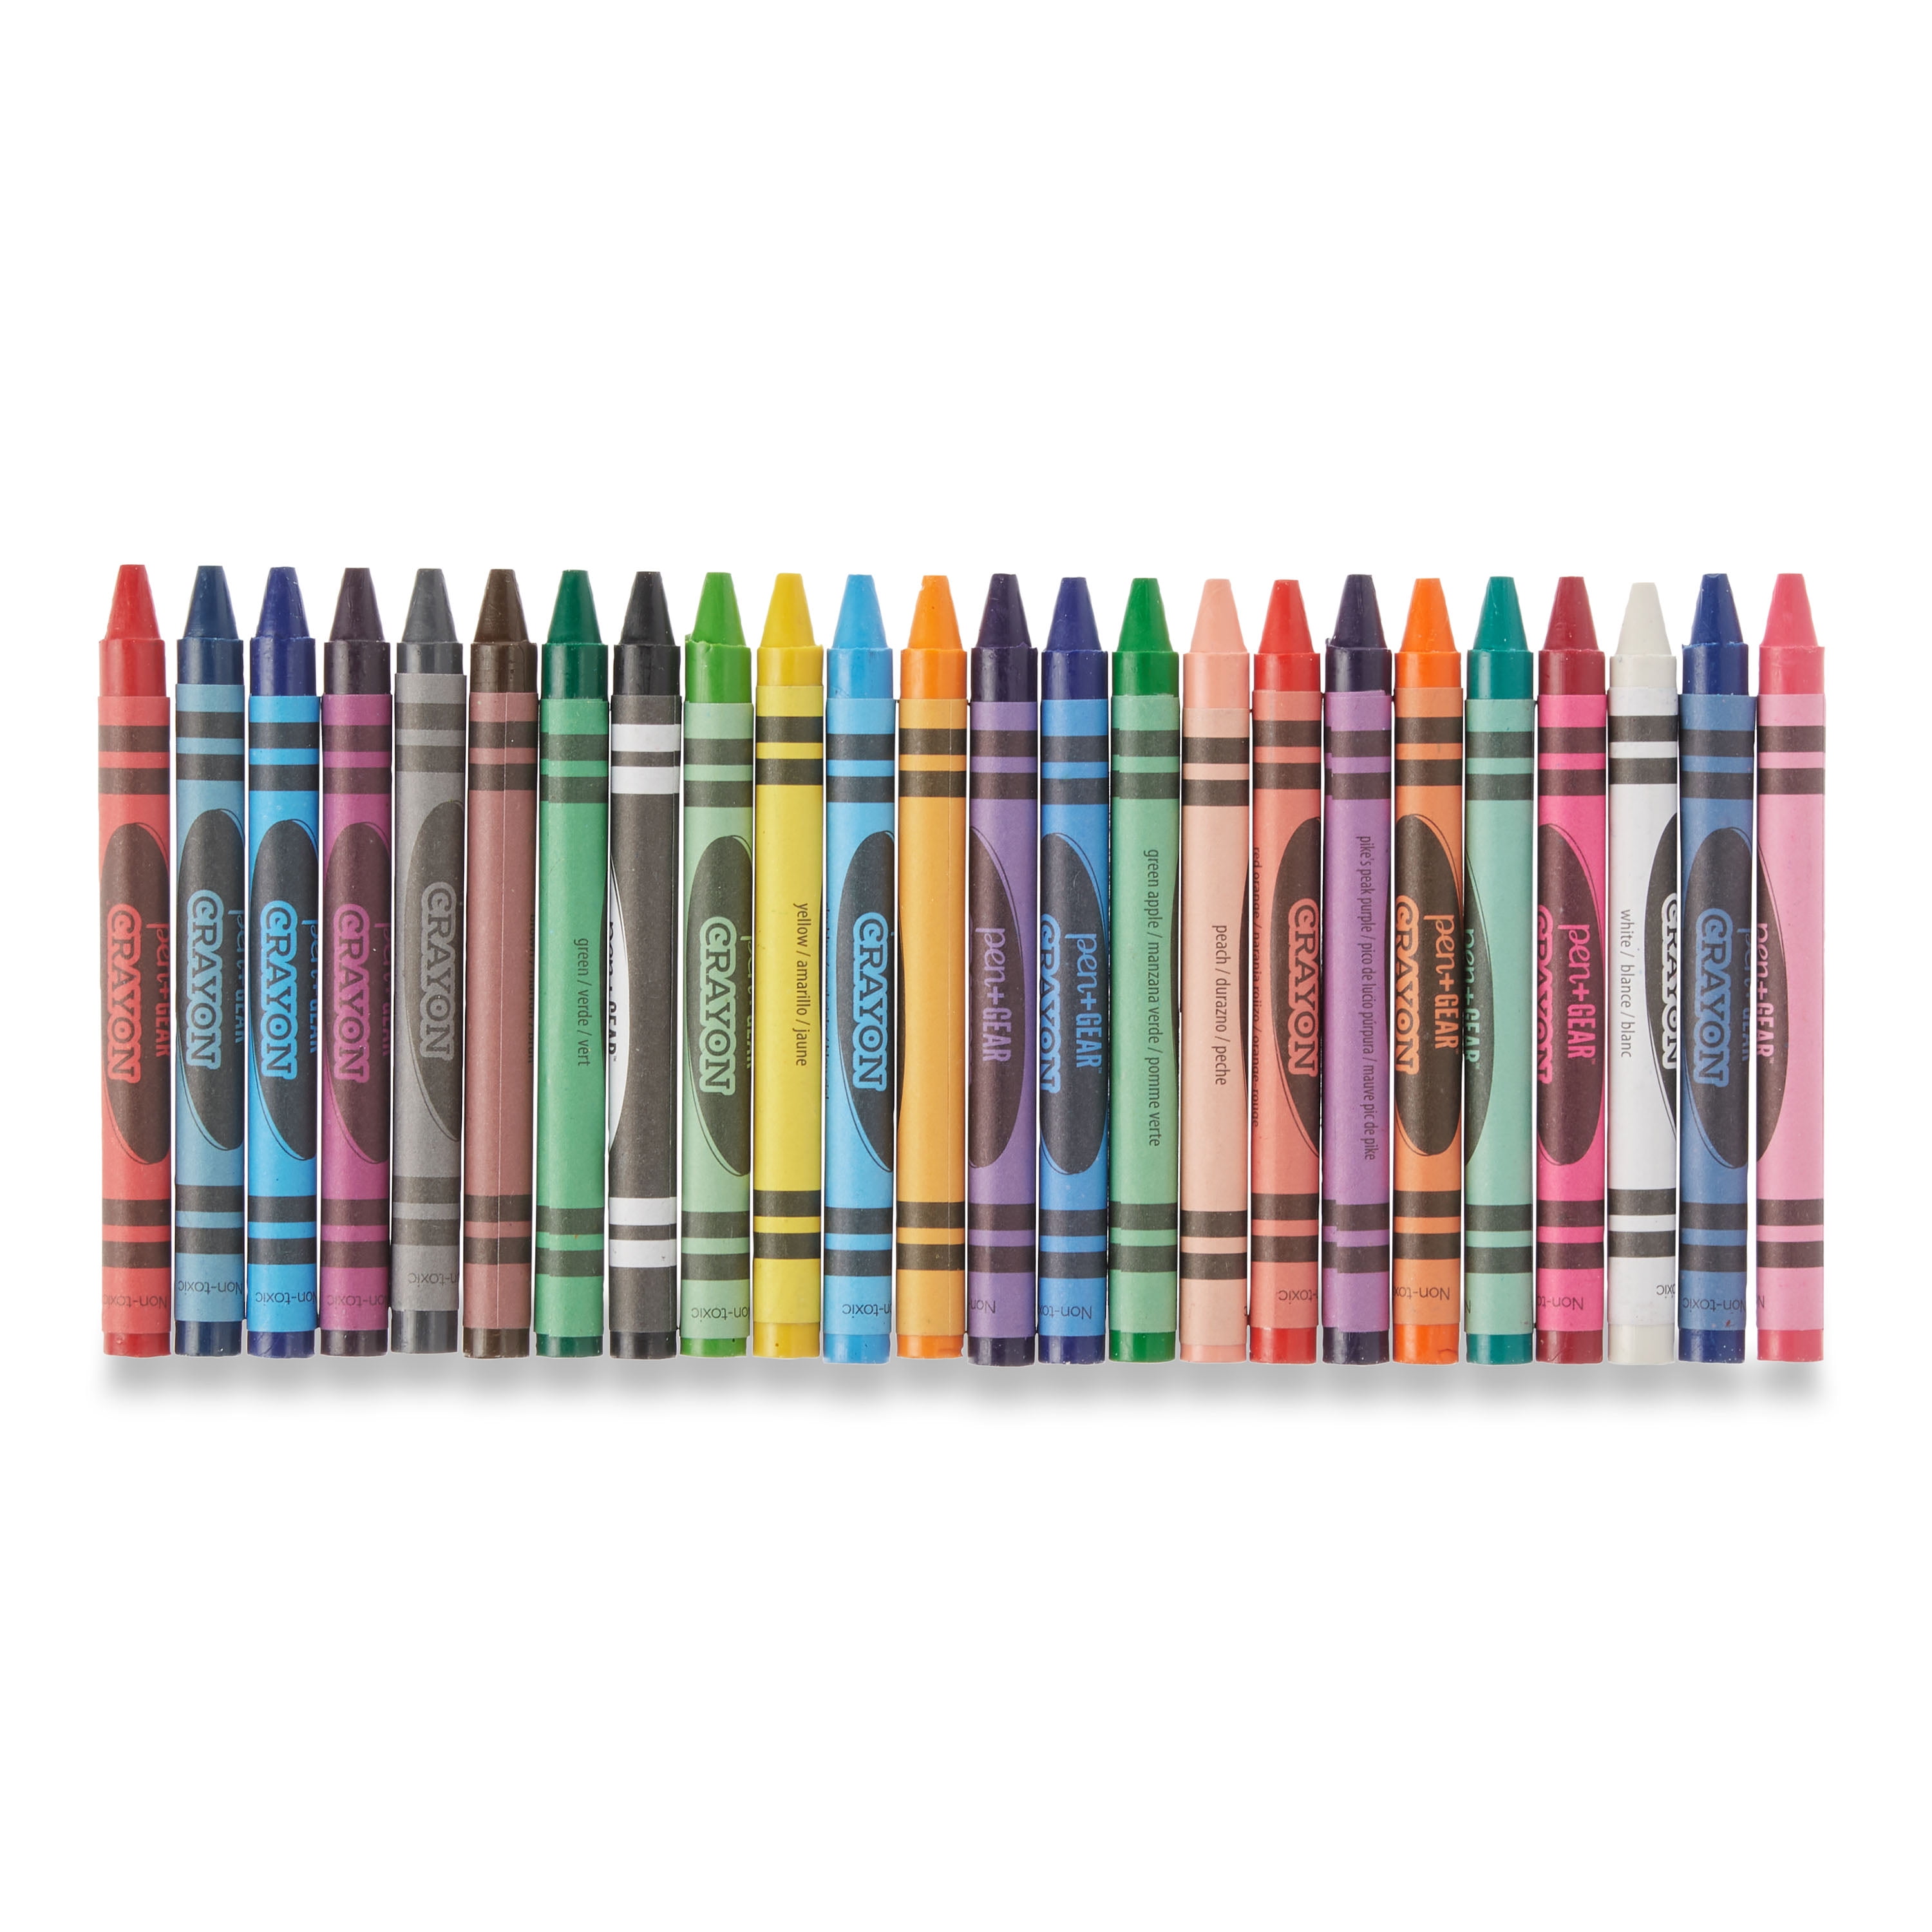 Pen + Gear Classic Crayons, 400 Count in Class Pack, 16 Assorted Colors, Size: Dimater 0.315 inch Length 3.54 inch, 36122484